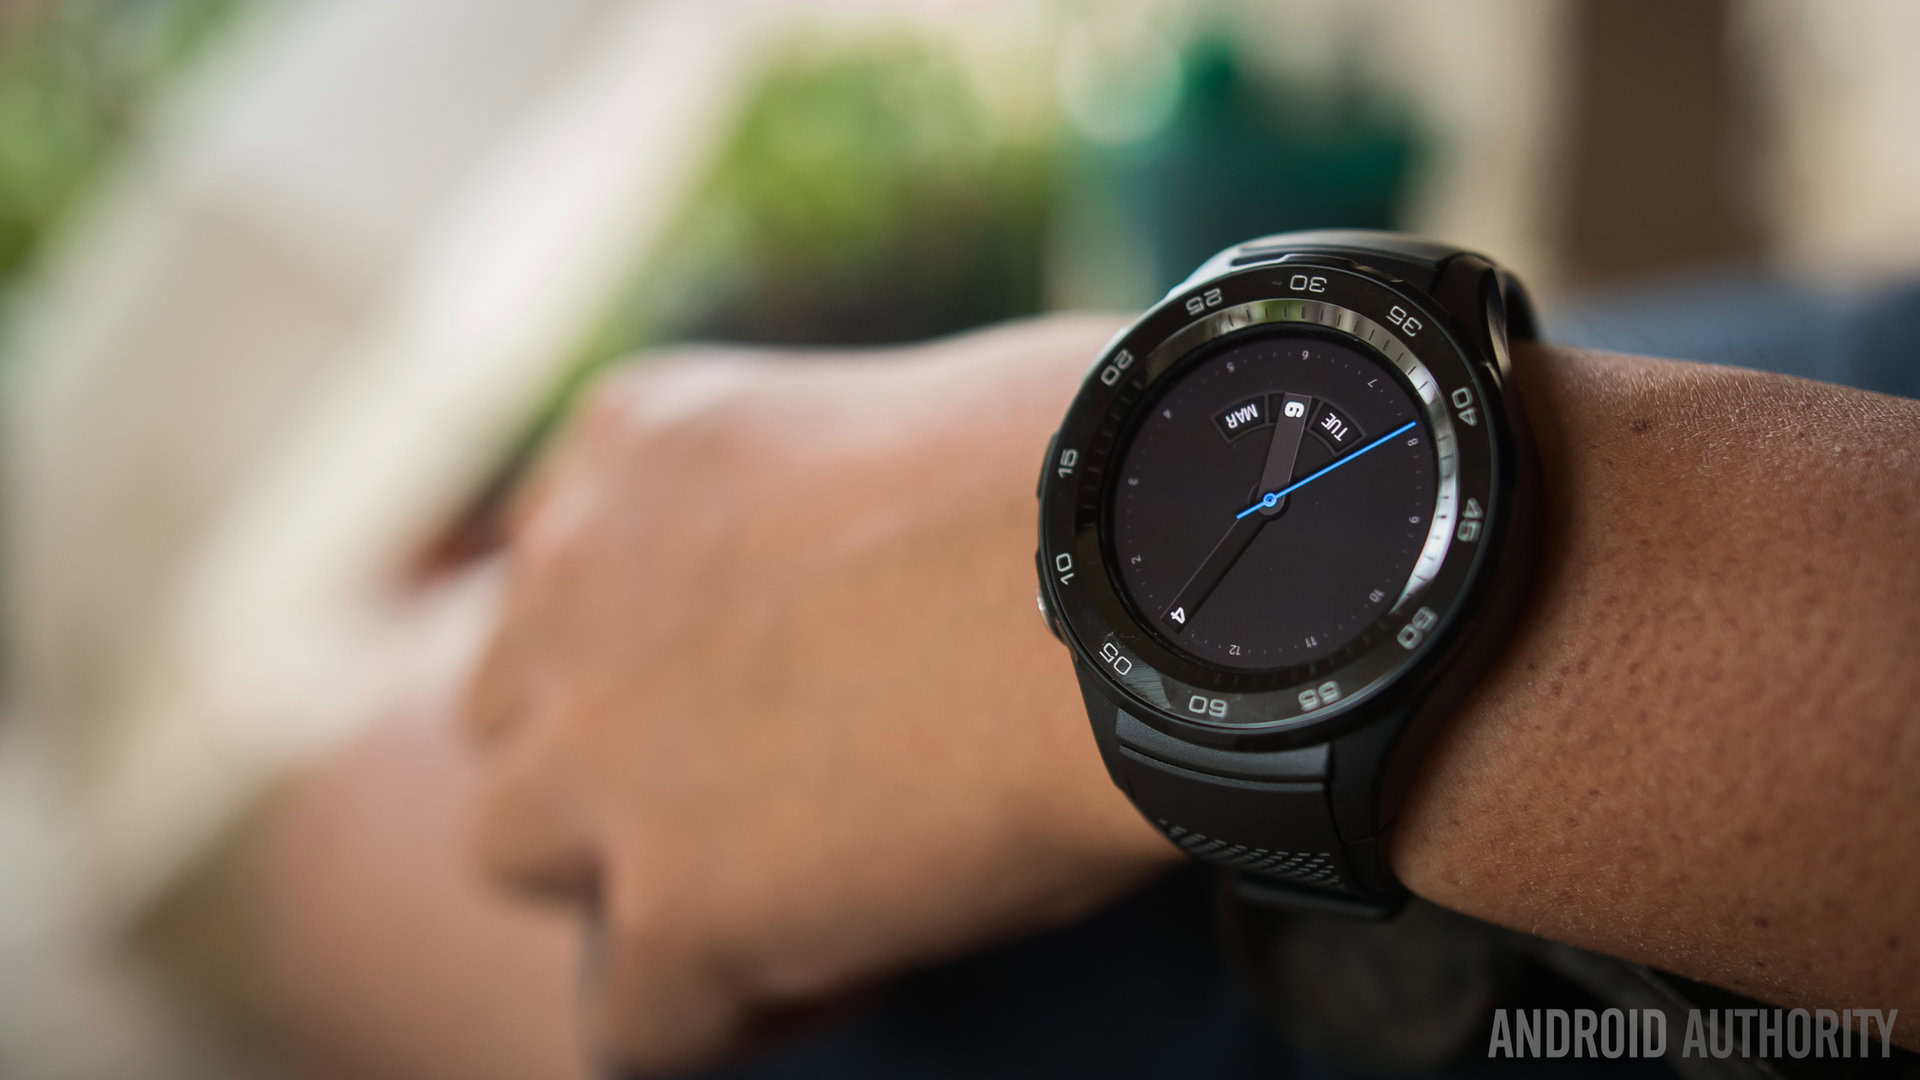 Watch 2 review - Android Authority